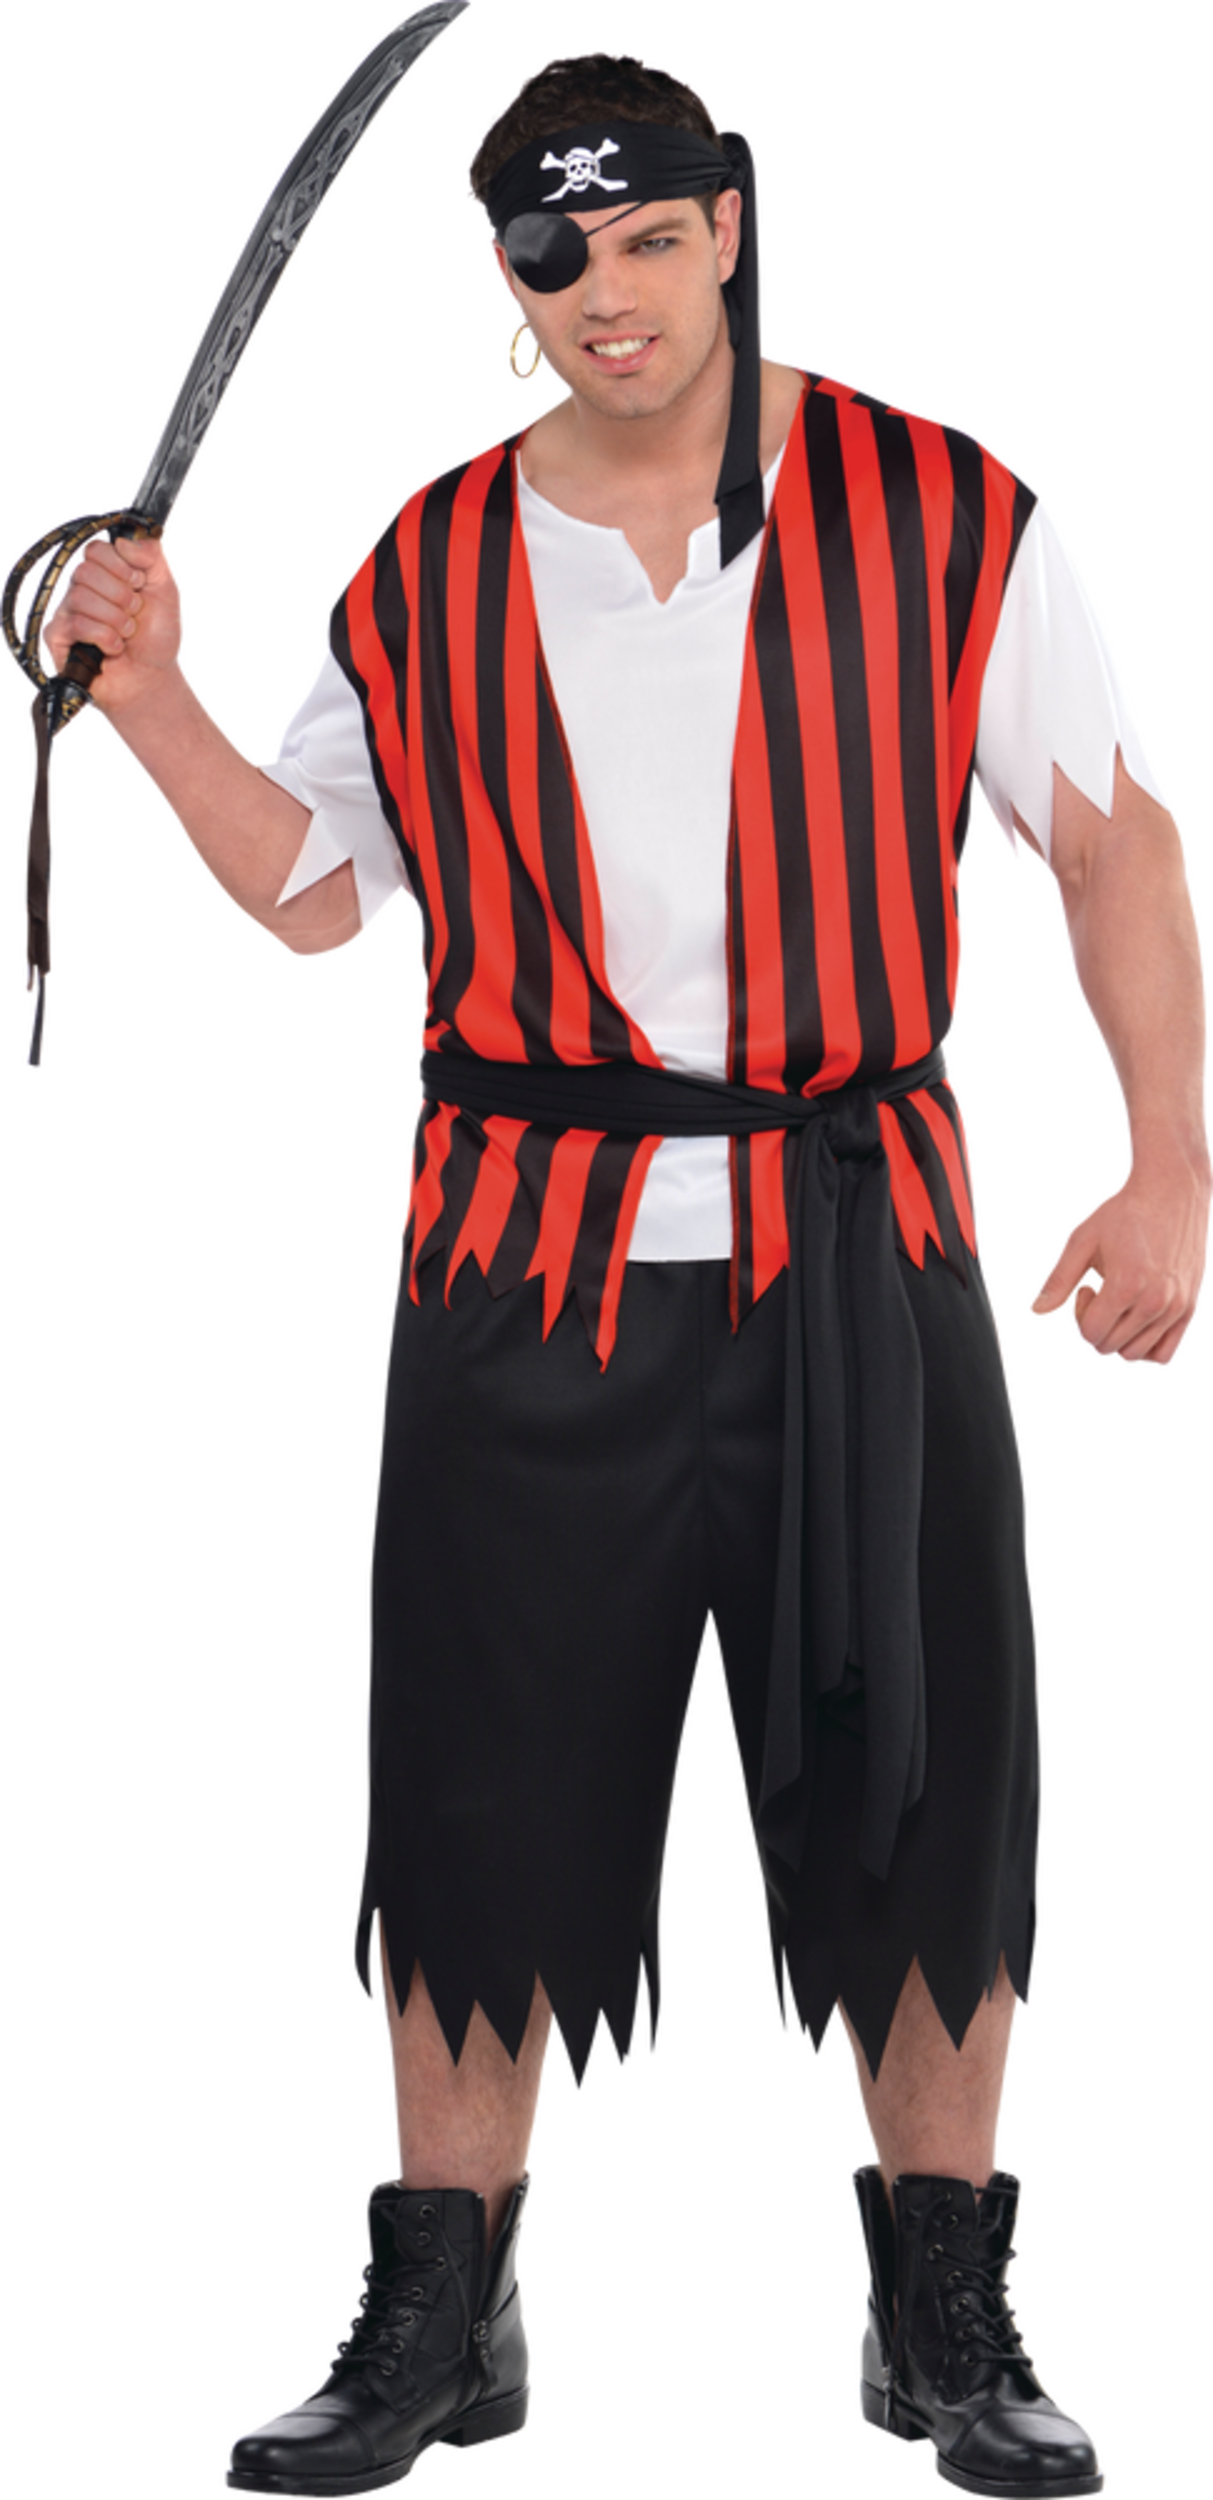 Mens Ahoy Matey Pirate Blackred Striped Outfit With Shirtpantsbandana Halloween Costume 5627